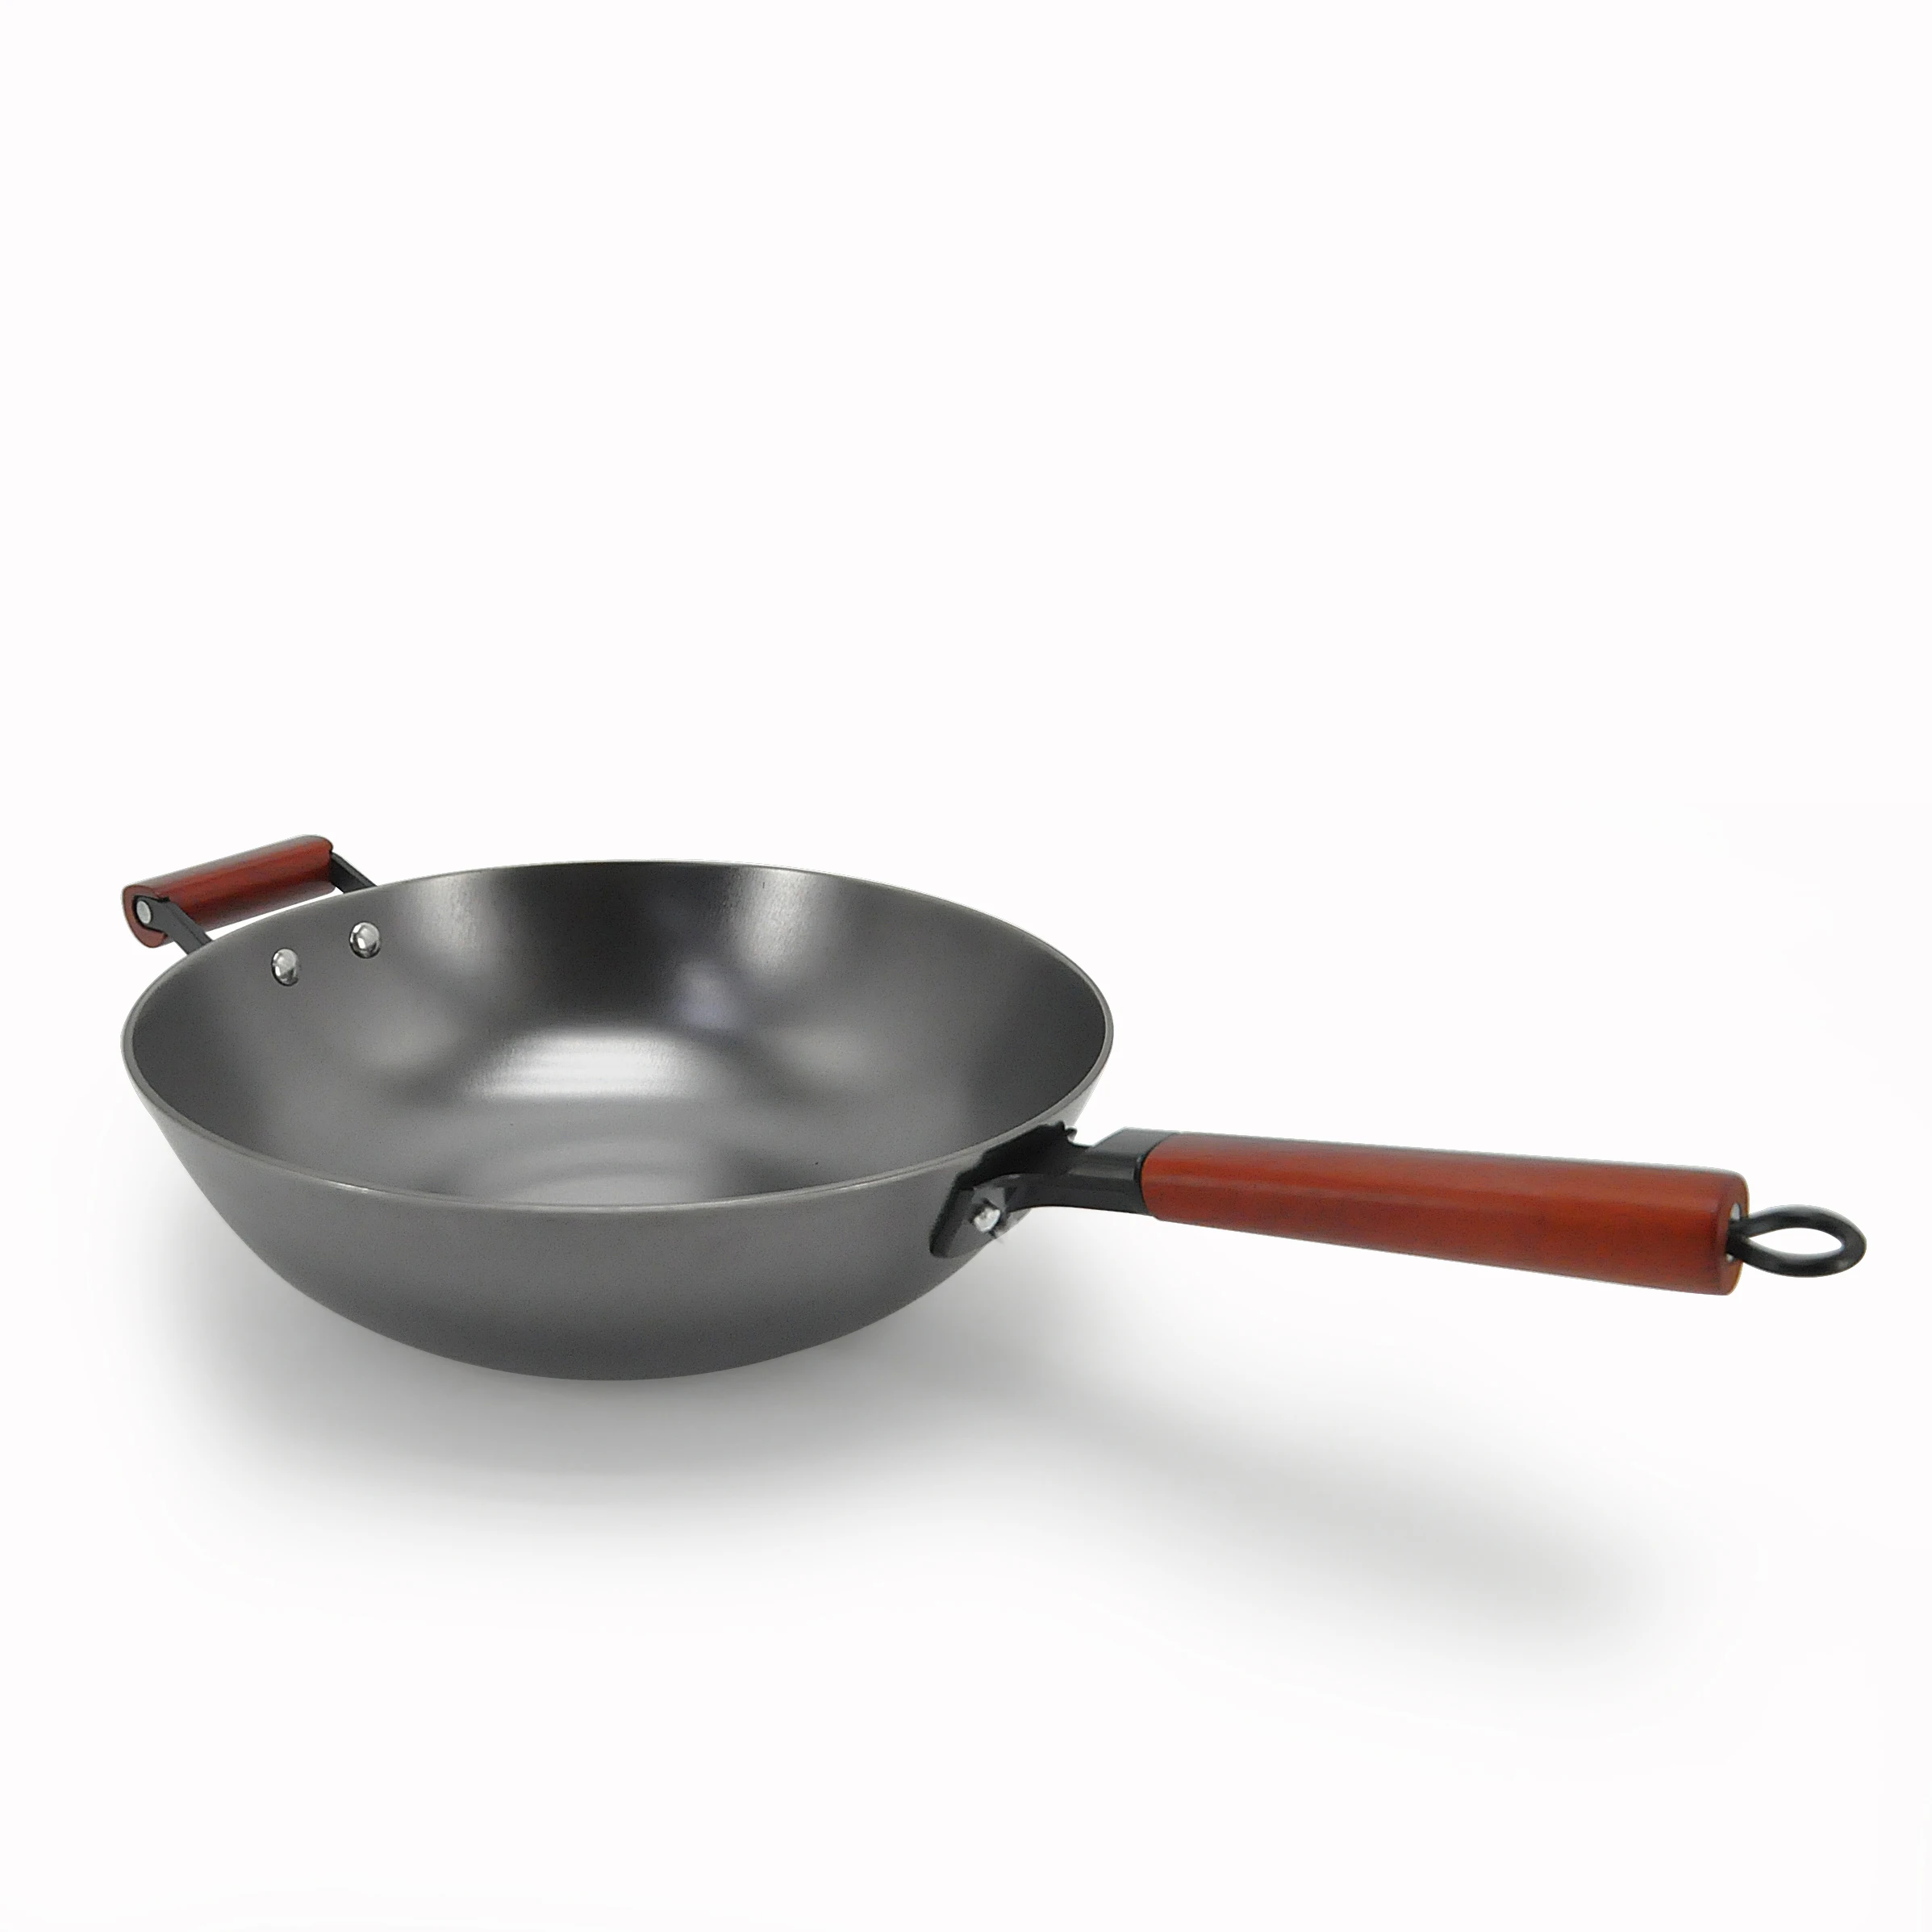 Wooden handle carbon steel chinese frying pan stir fry cast iron cookware pan (1600492061378)